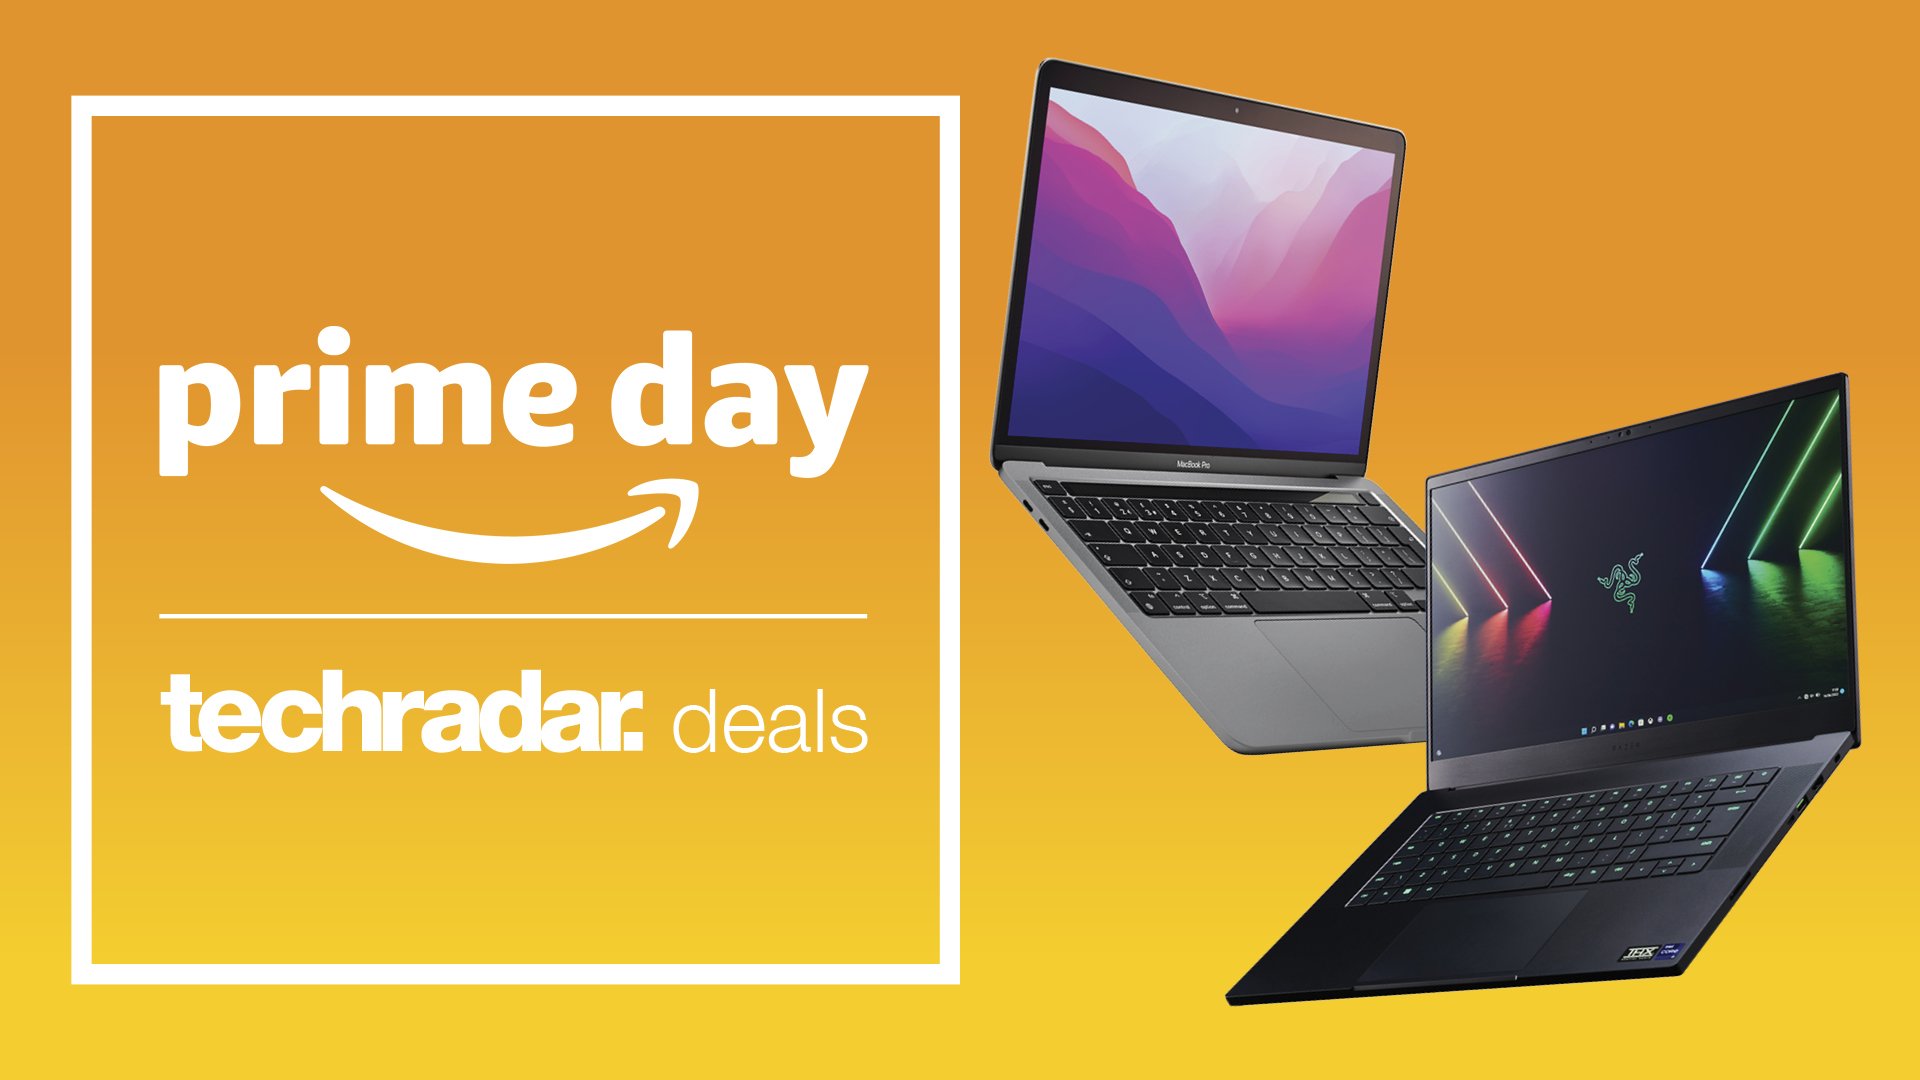 Amazon Prime Day laptop offers header image with two laptops on yellow background